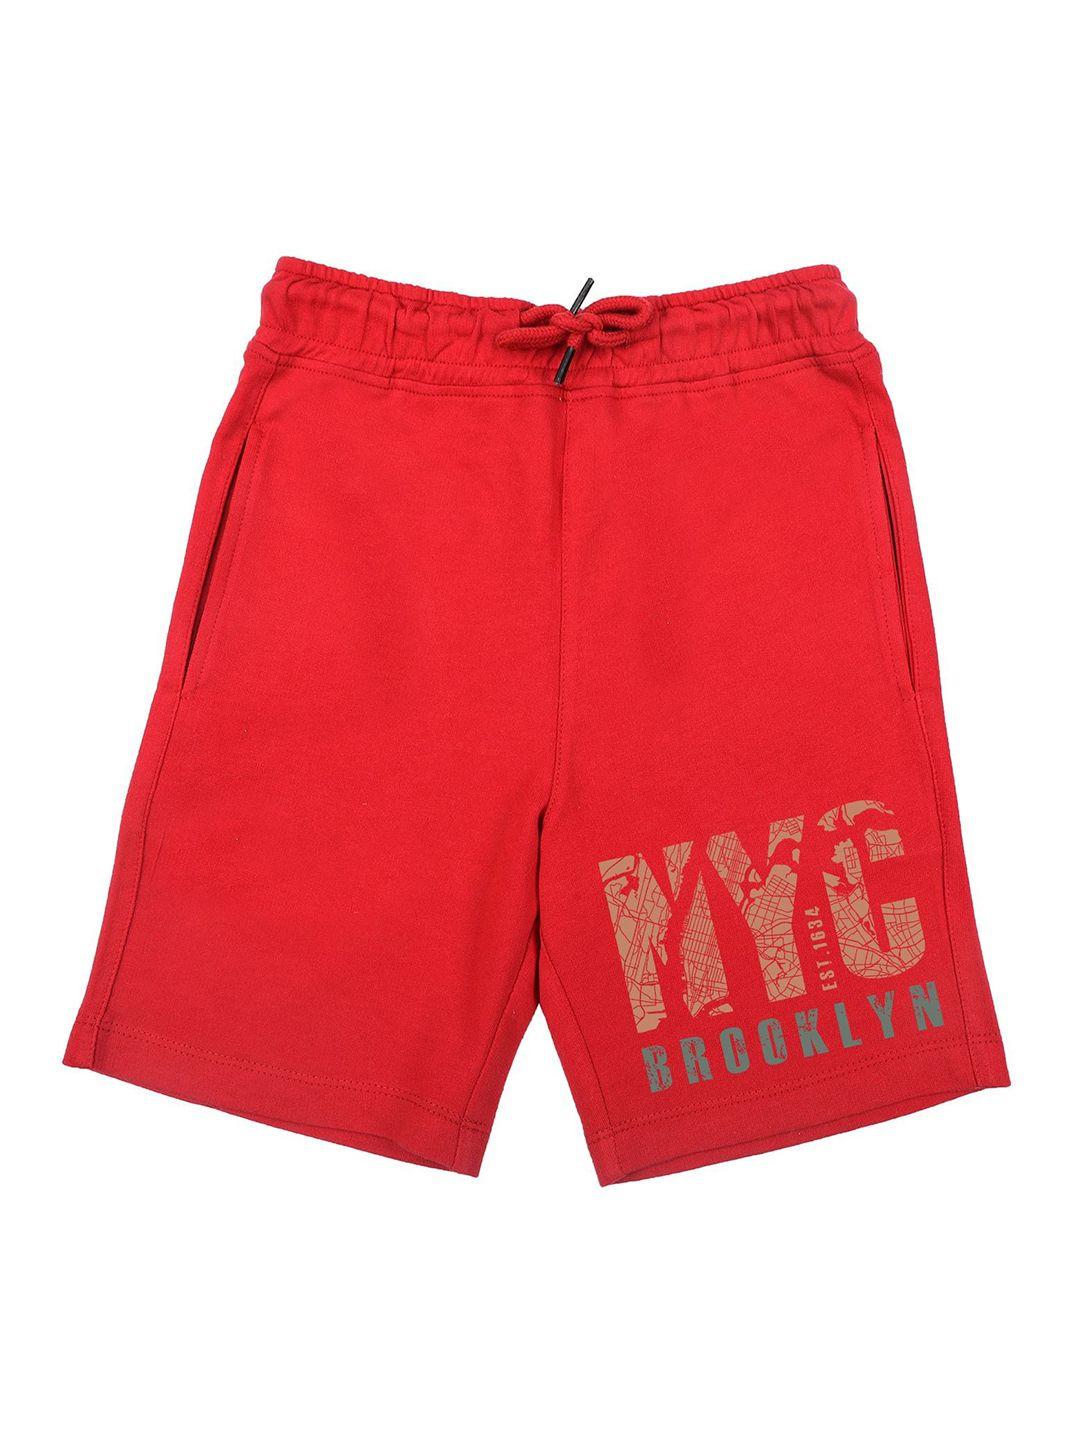 wear your mind boys red typography printed shorts